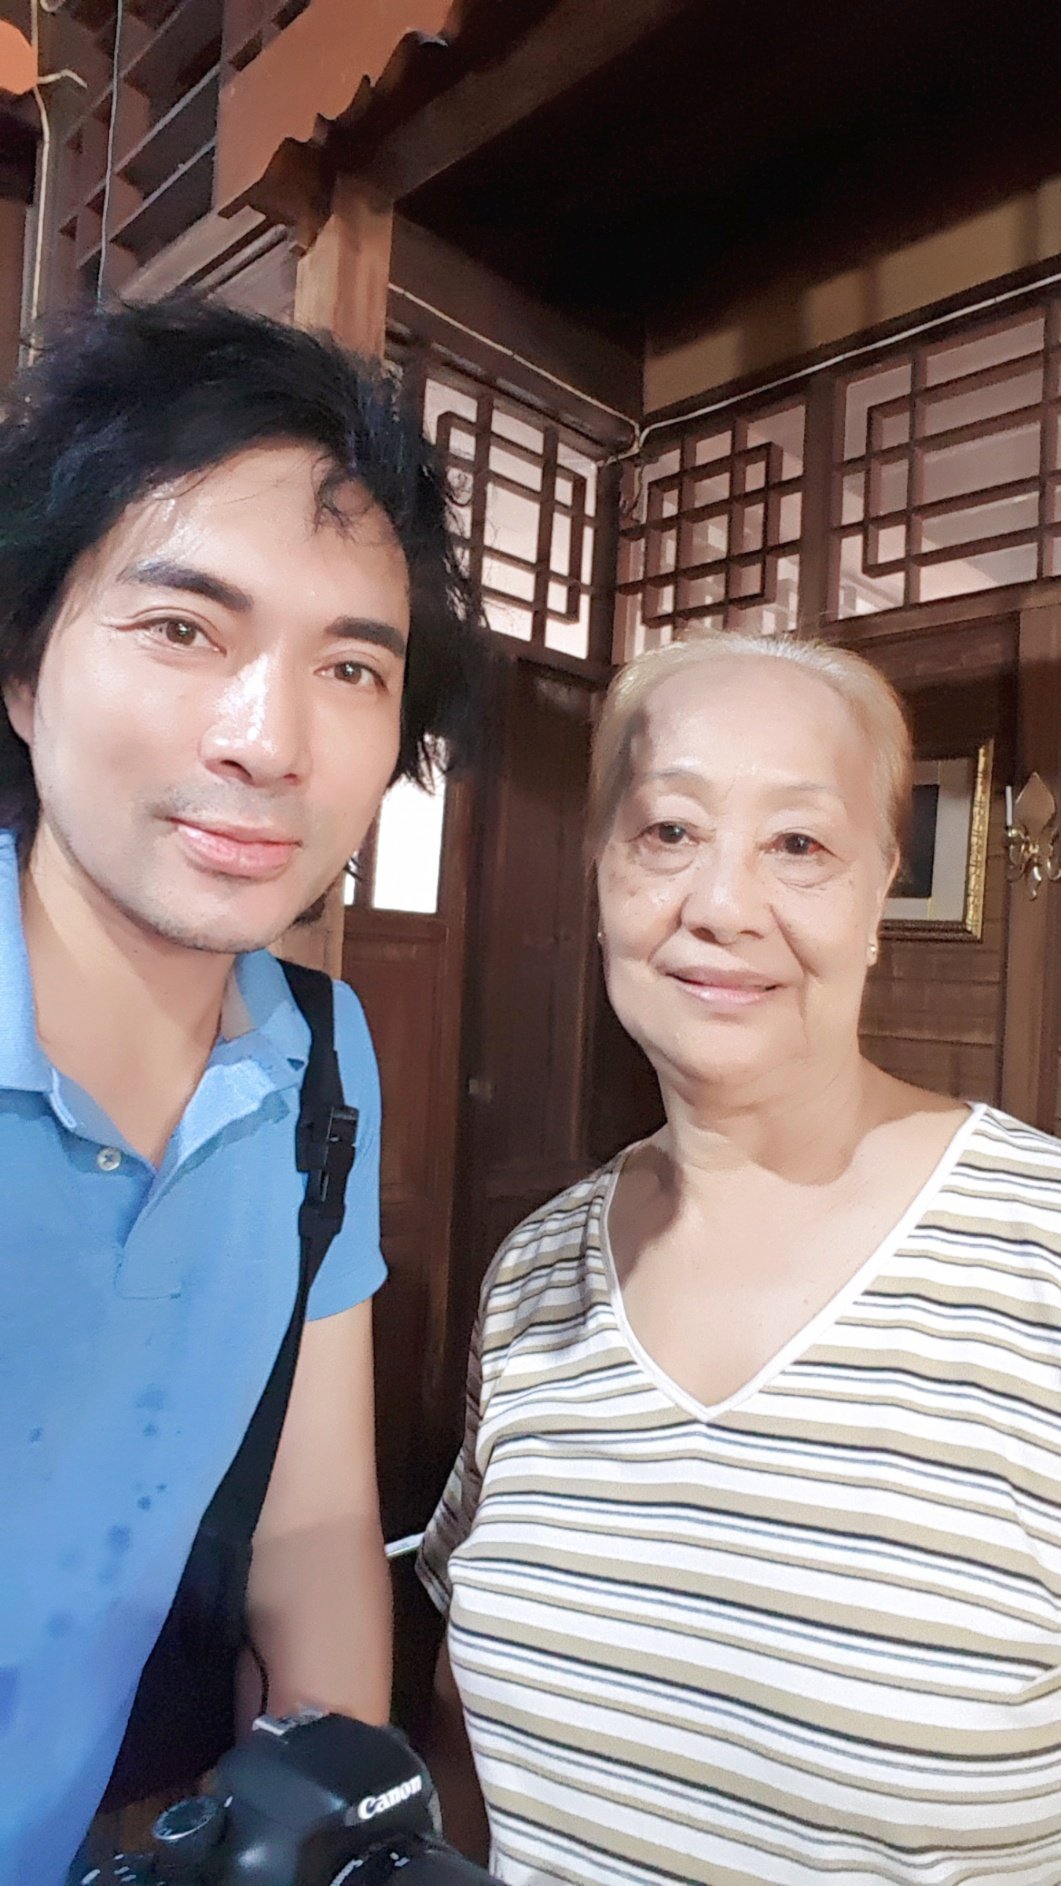 Me with Ruth Sapalleda Garingo, cousin of the owner and caretaker of the Aldren Tac-An Nacion Ancestral House